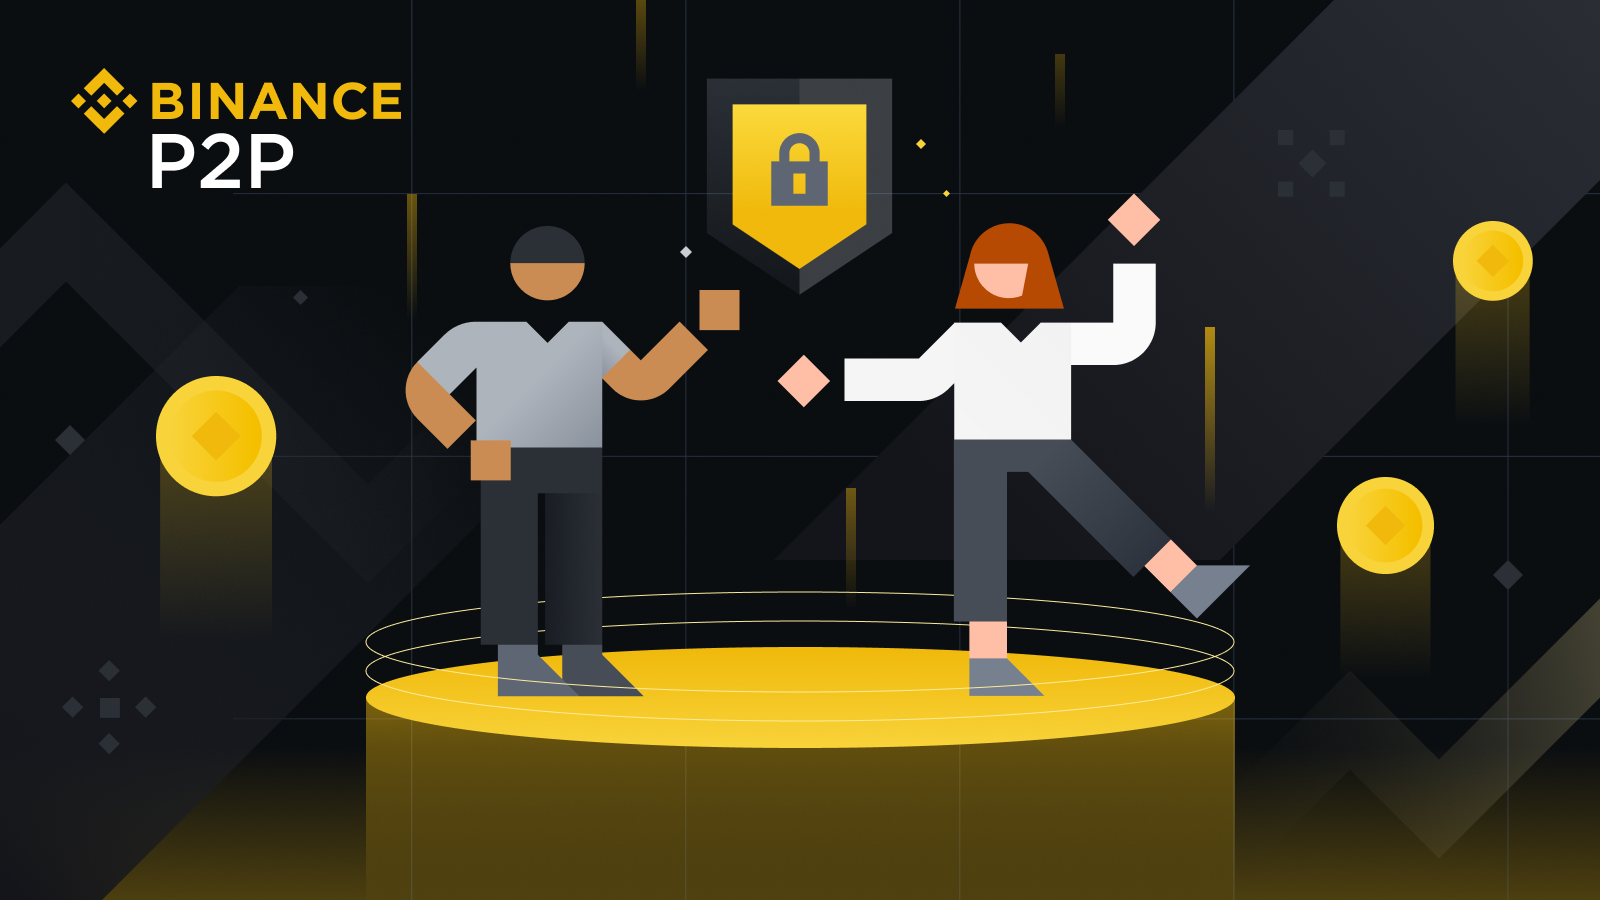 Binance P2P: How Am I Protected as a P2P Trader?